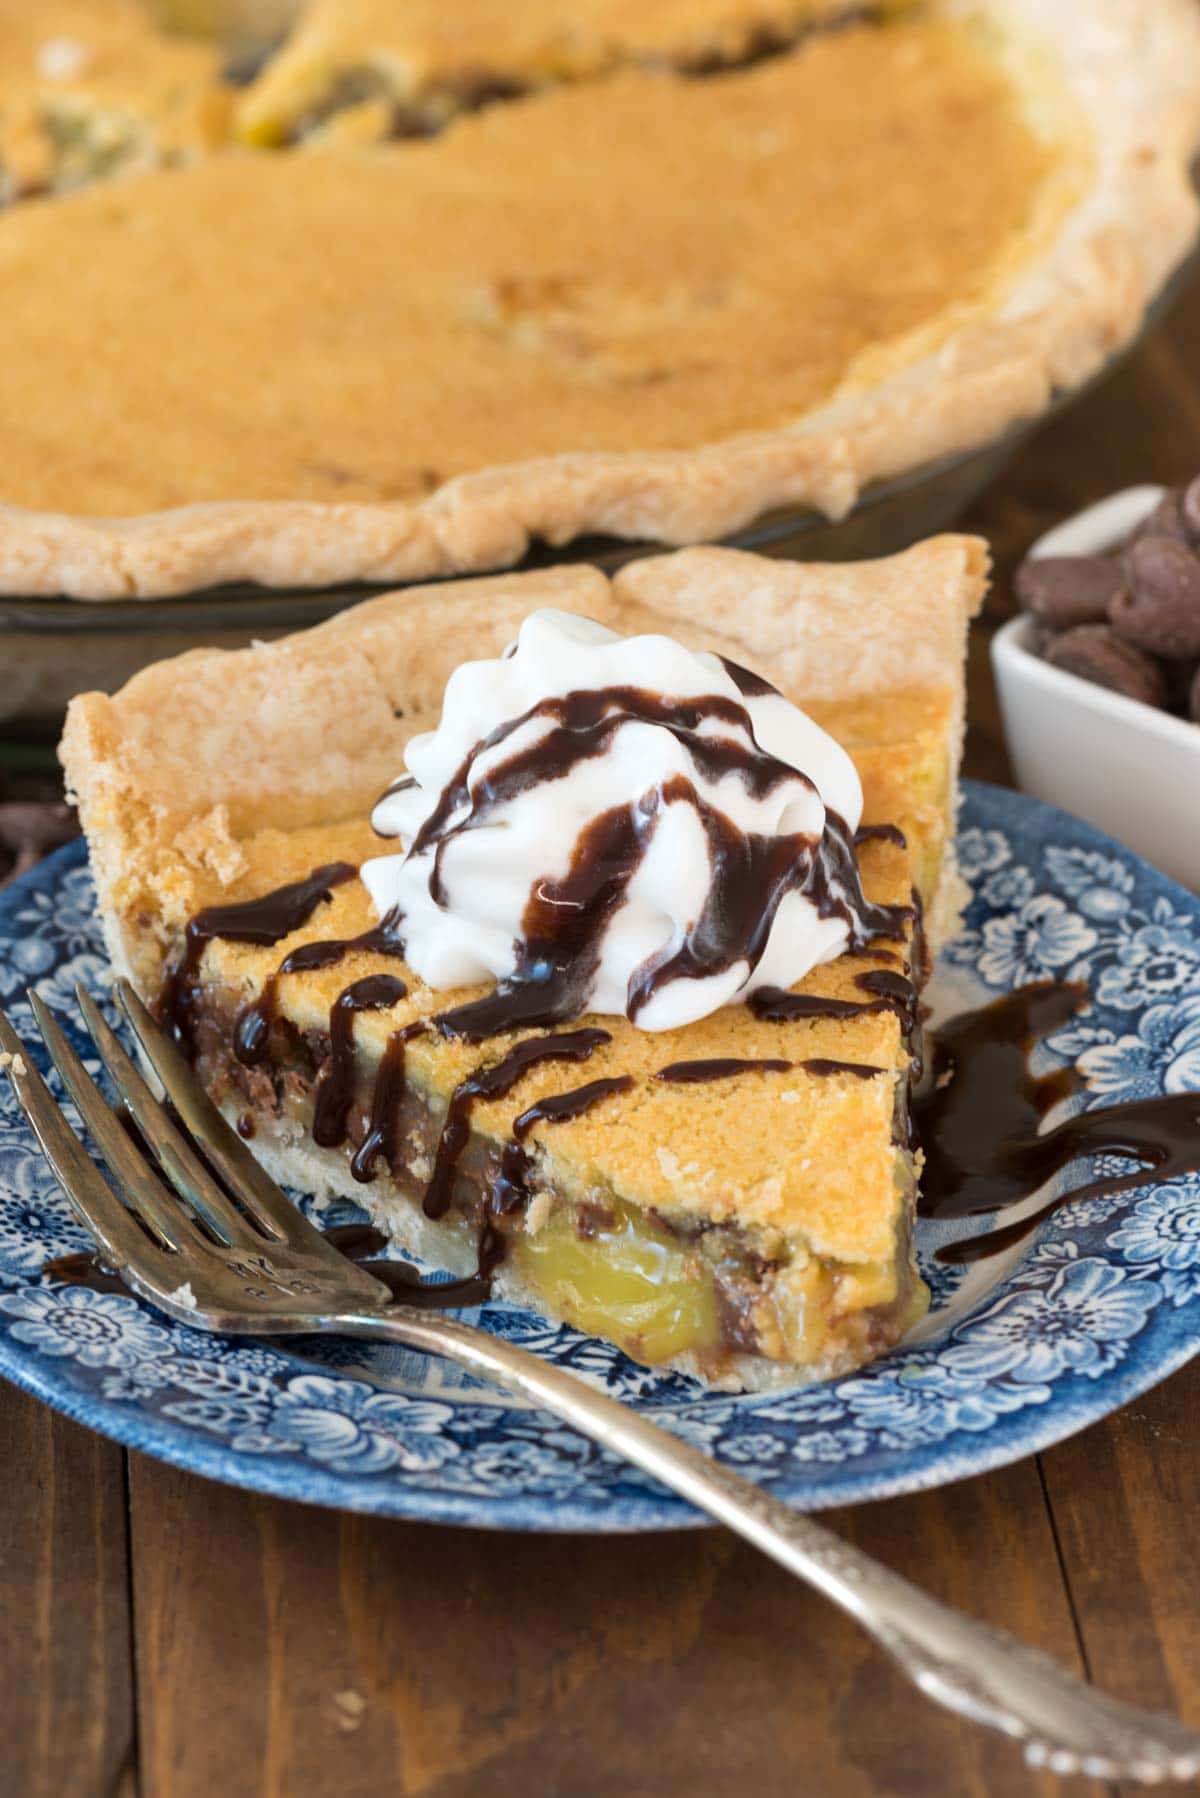 Chocolate Chip Chess Pie - this easy classic chess pie recipe is FULL of chocolate chips! It's the perfect pie for any holiday - everyone LOVES it!